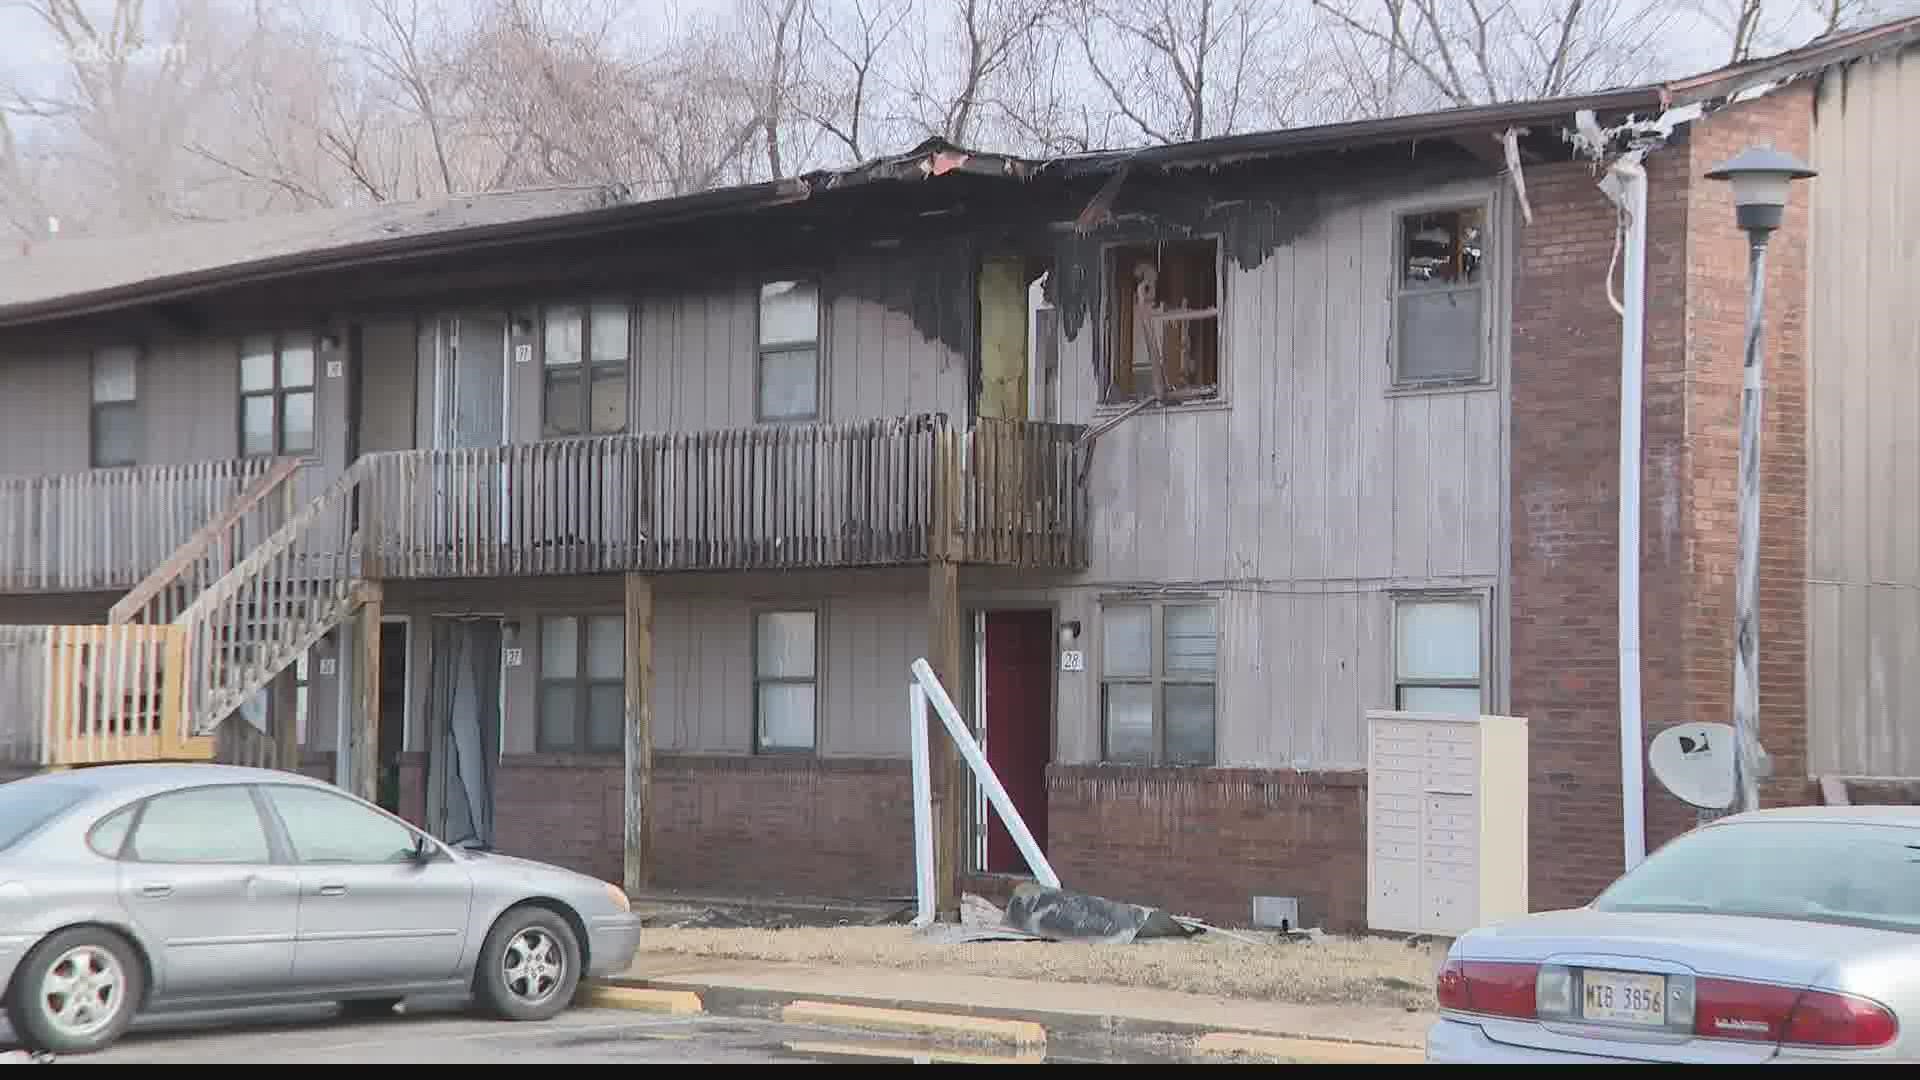 A fire destroyed an apartment building Saturday morning in Cahokia Heights, Illinois. As many as 30 firefighters responded to the scene.